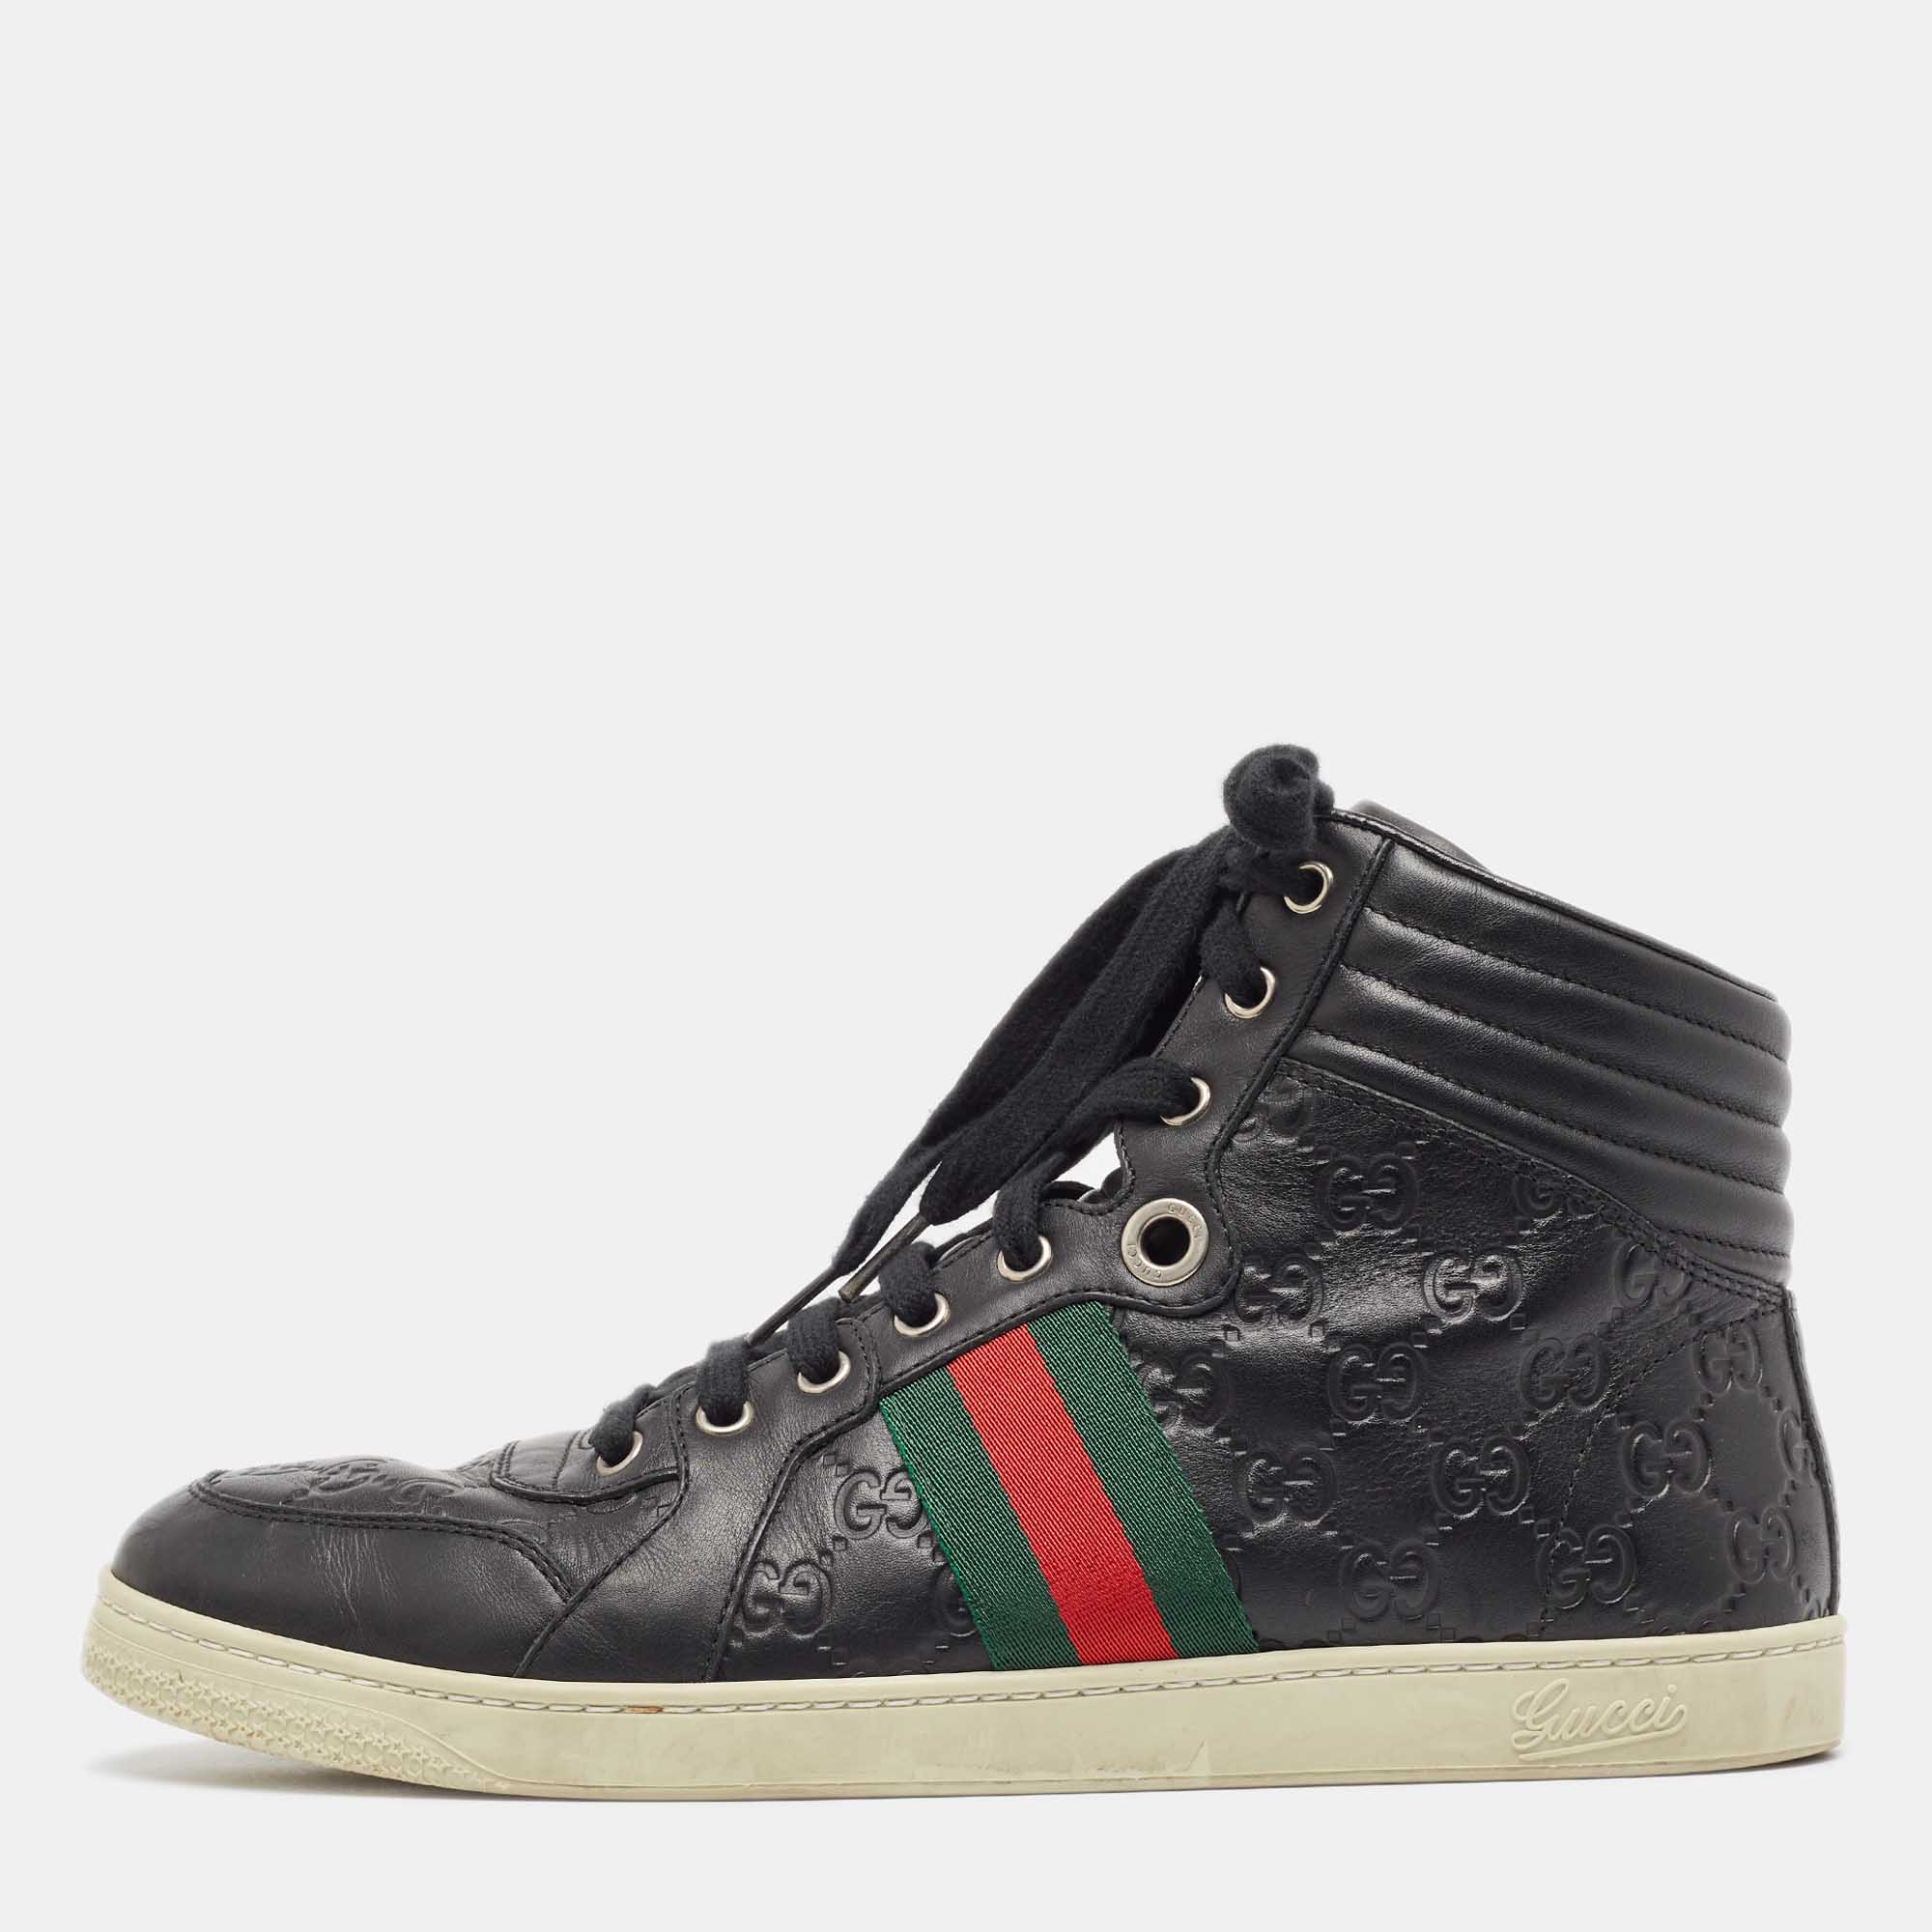 Gucci black guccissima leather web high top sneakers size 43